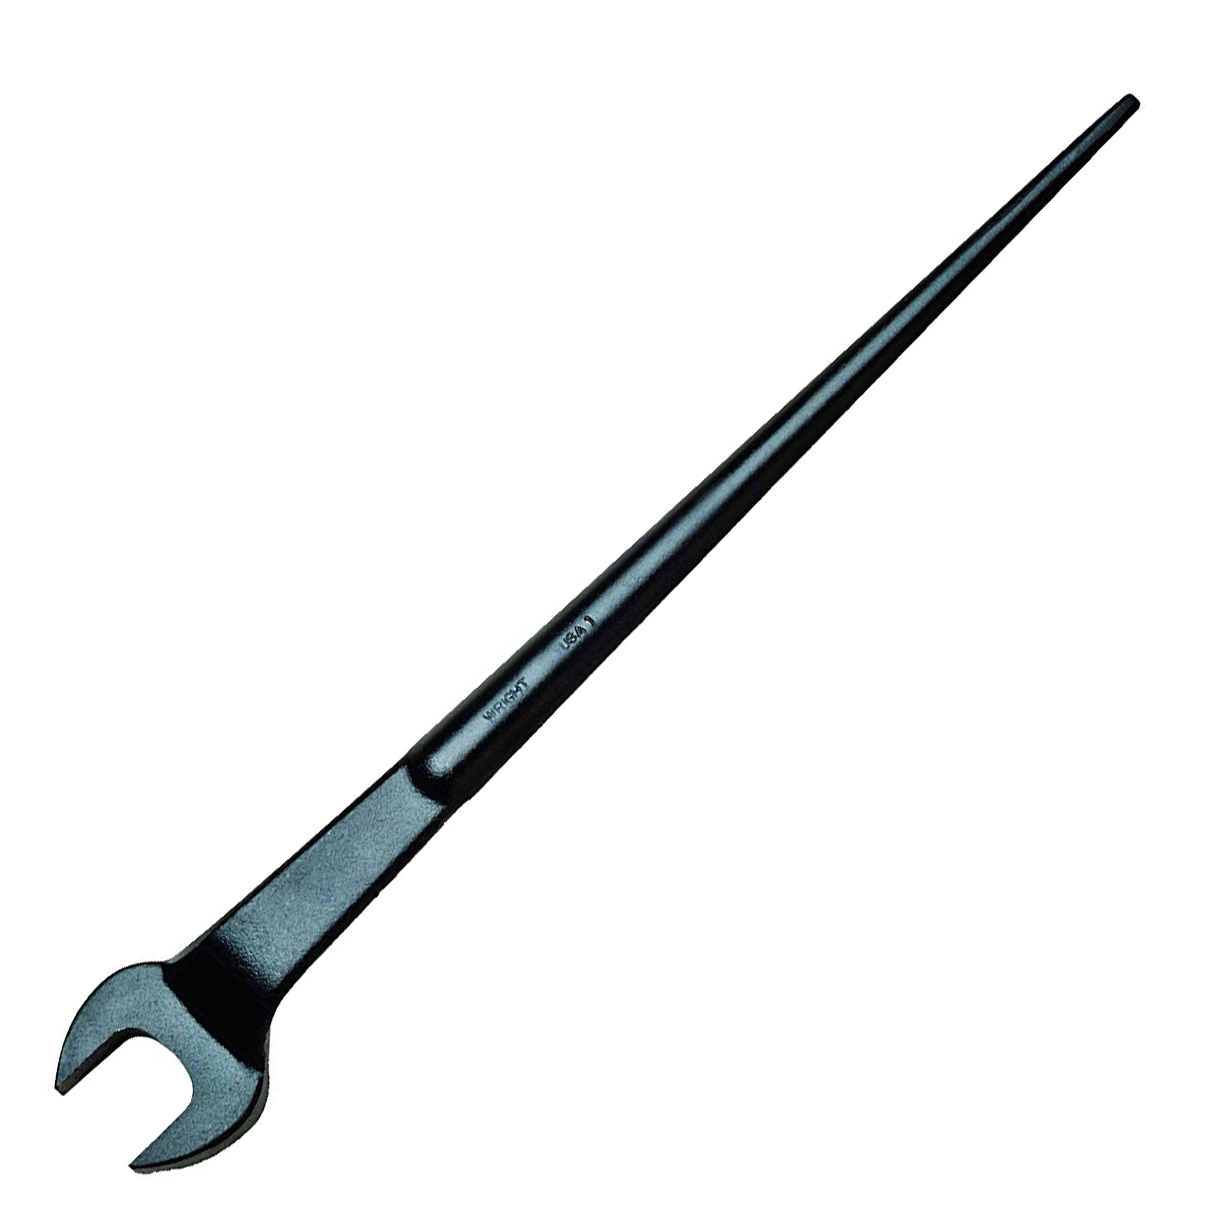 Wright 1-1/16" Structural Wrench Offset Head Black #1734 (1734WR)